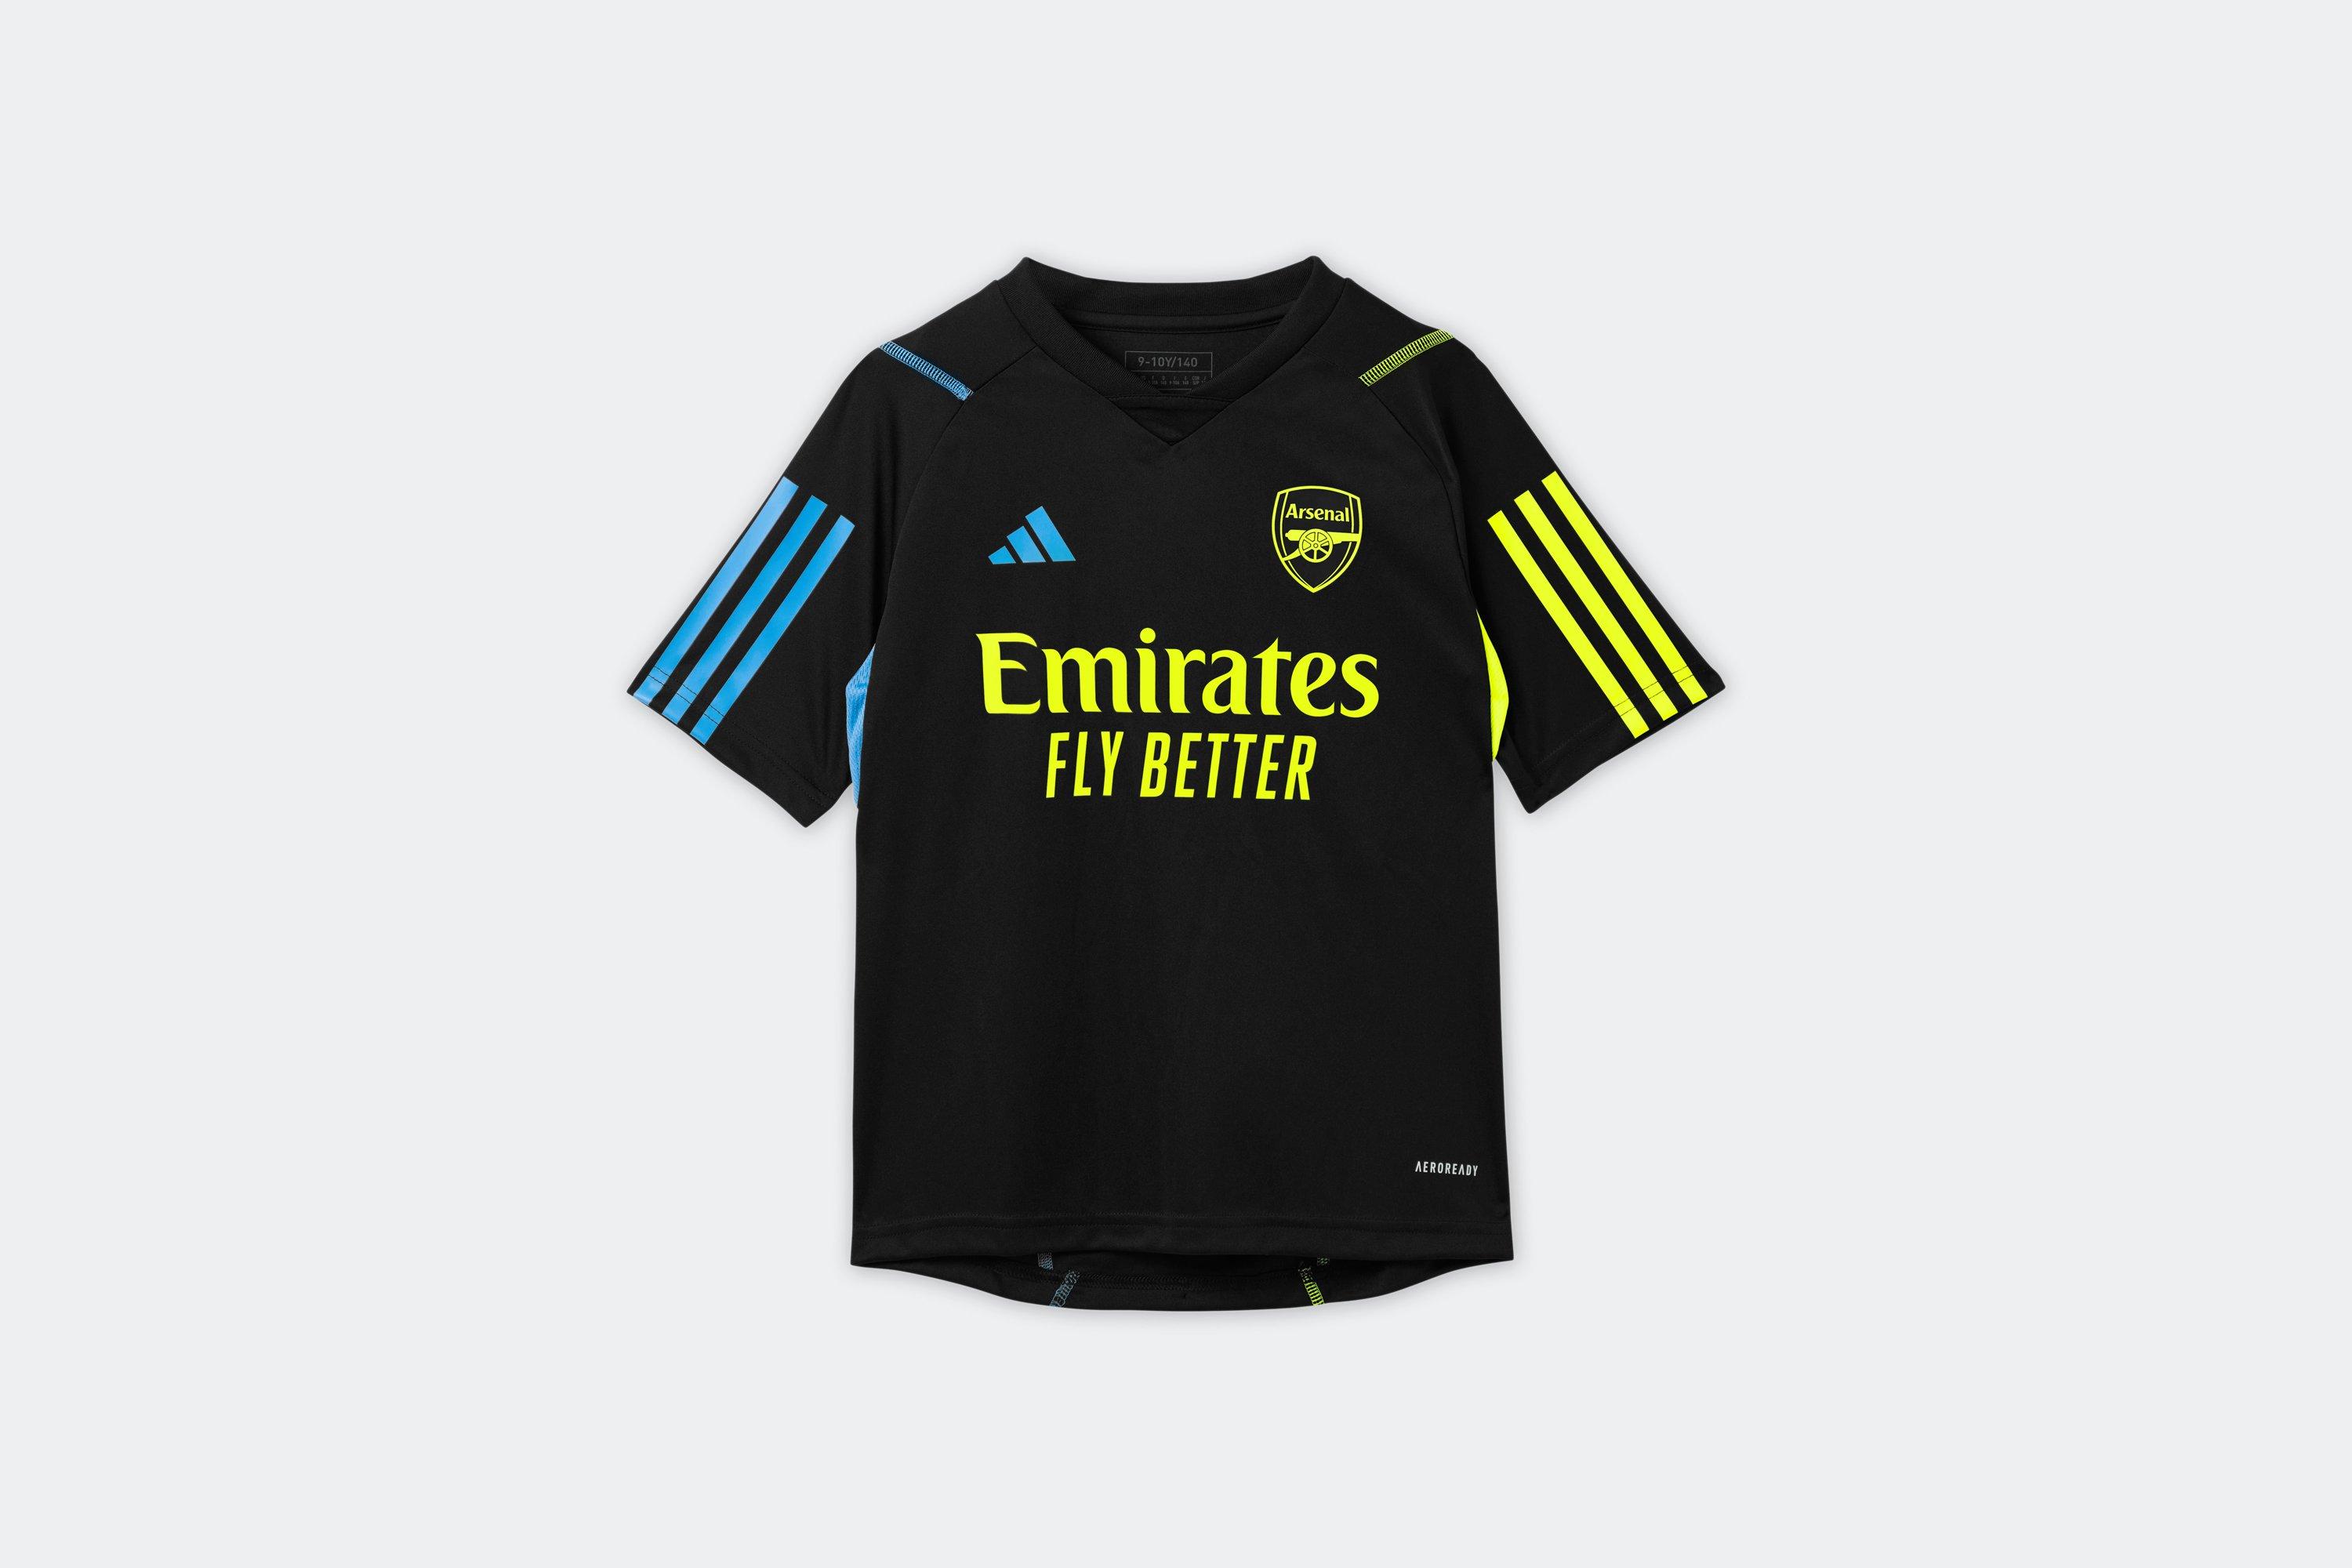 Find your kids' Arsenal kit and supplies